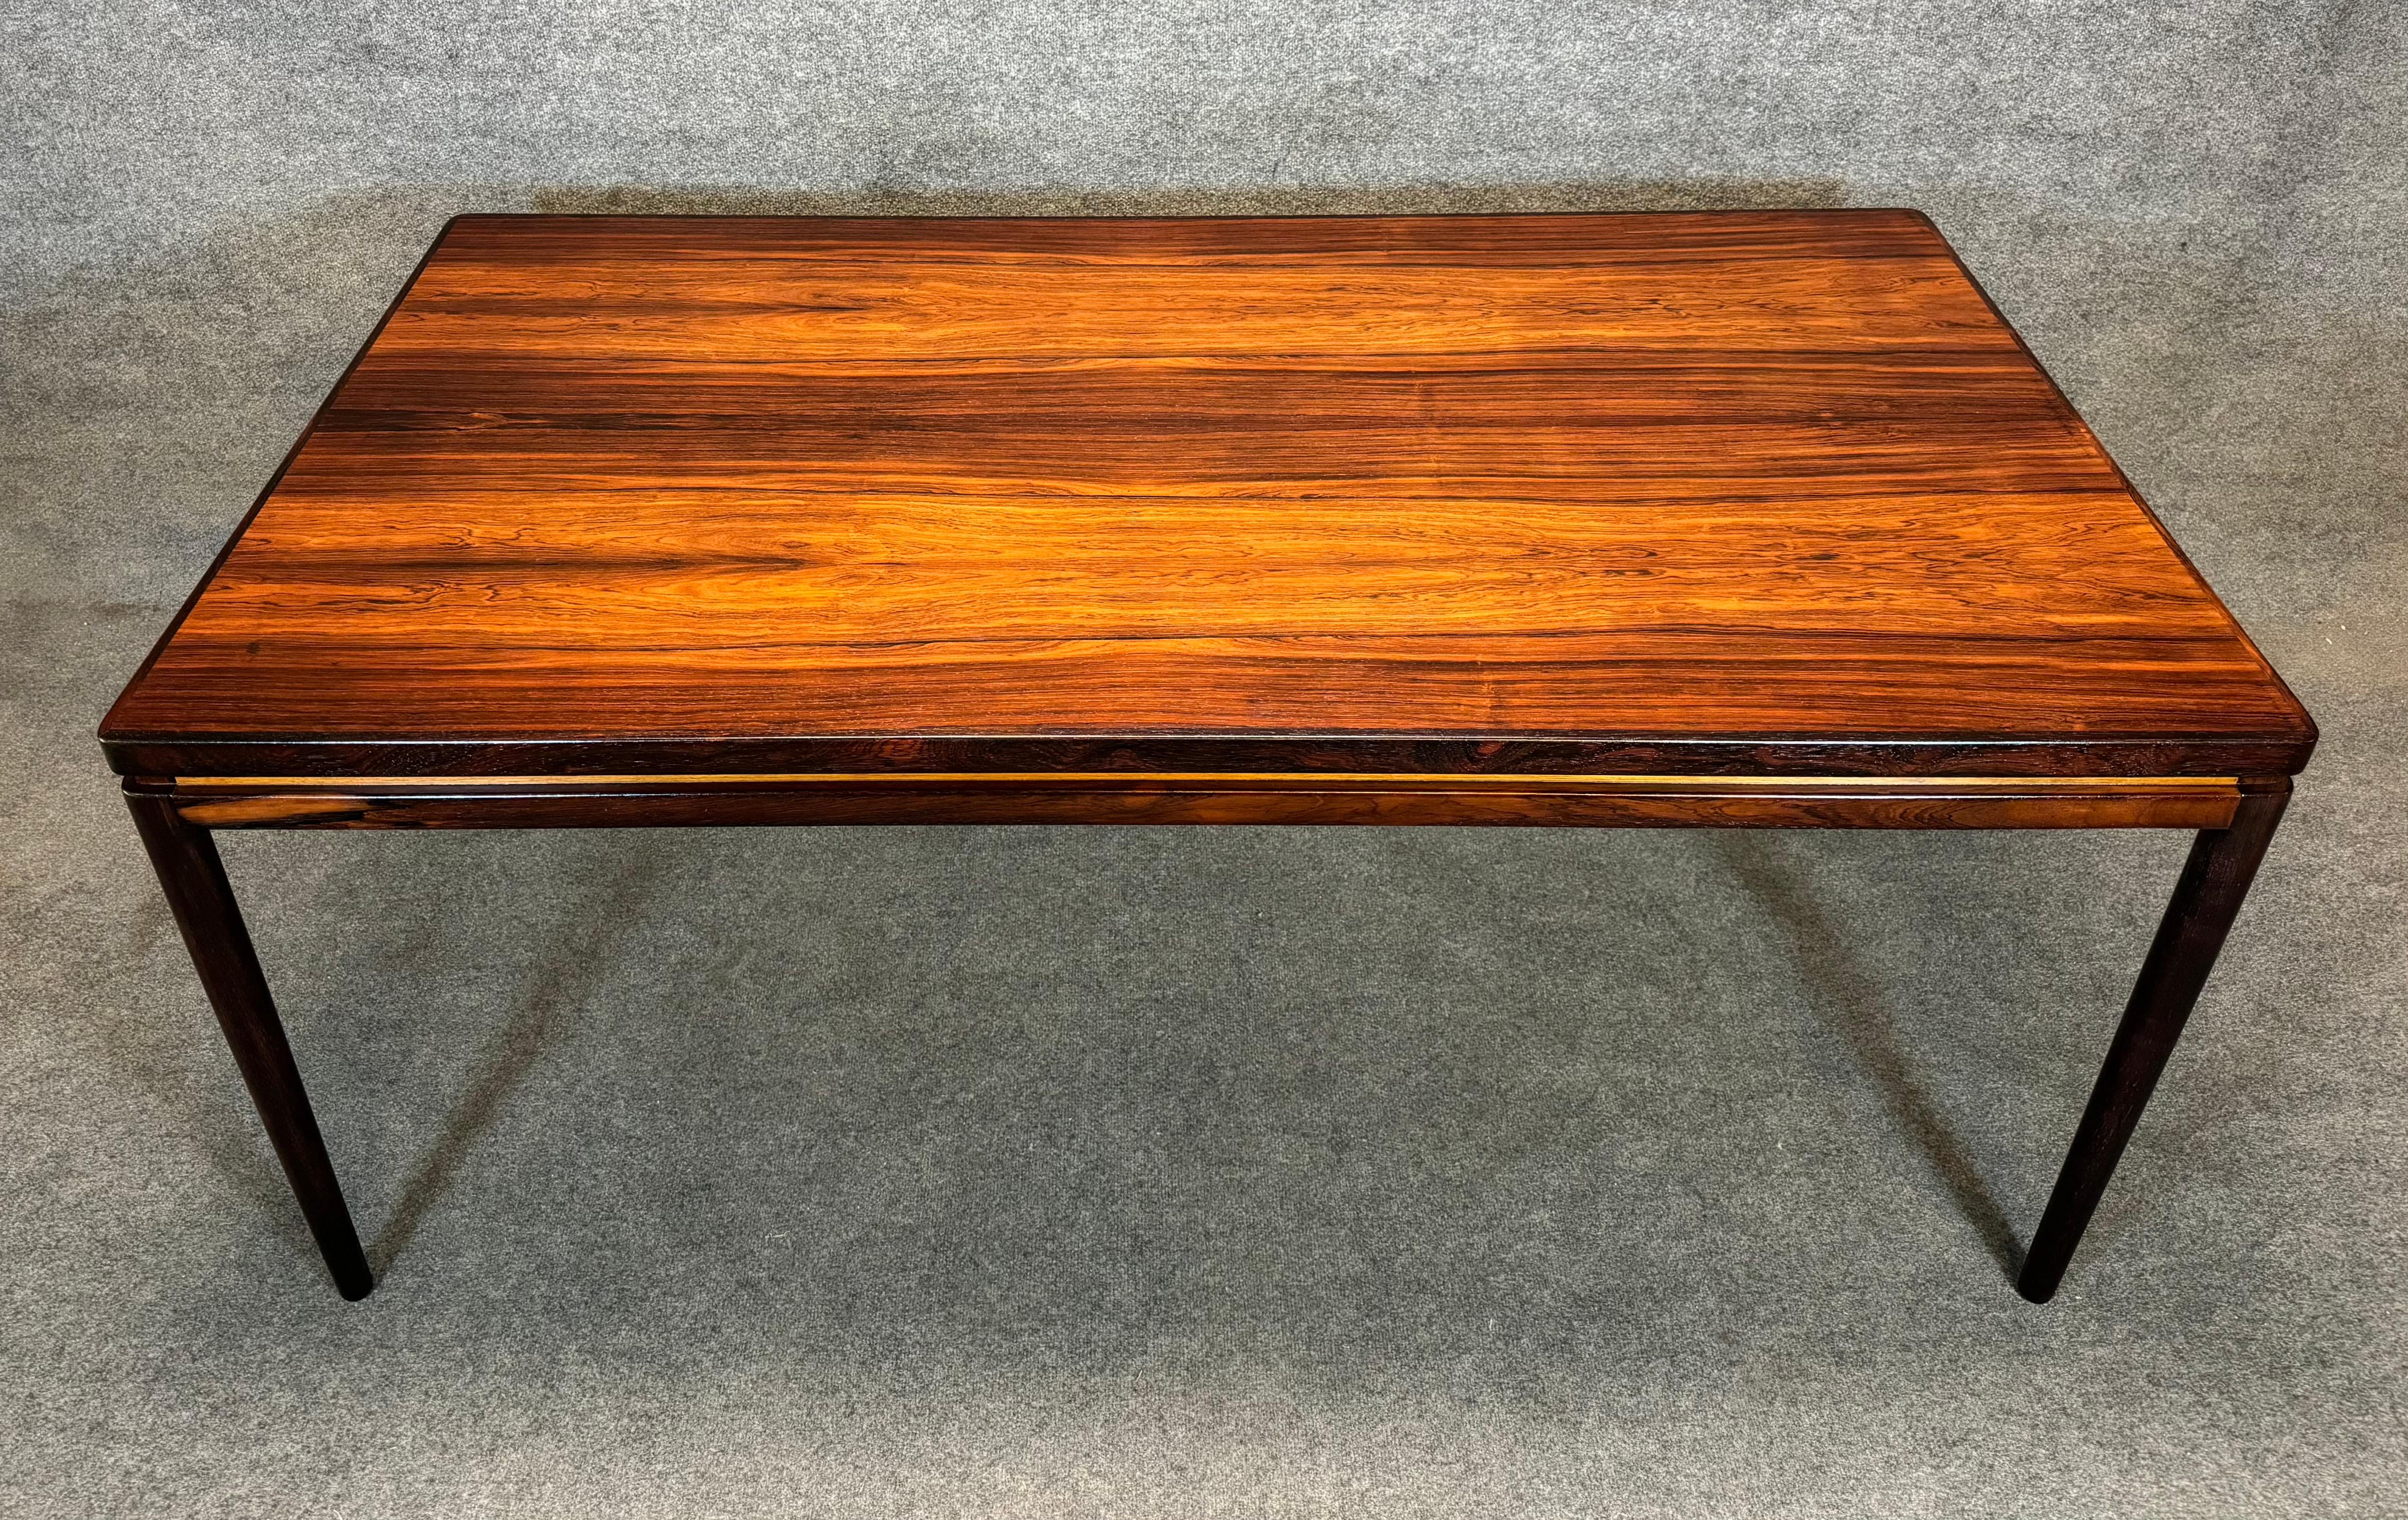 Vintage Danish Mid Century Modern Rosewood Dining Table by Johannes Andersen In Good Condition For Sale In San Marcos, CA